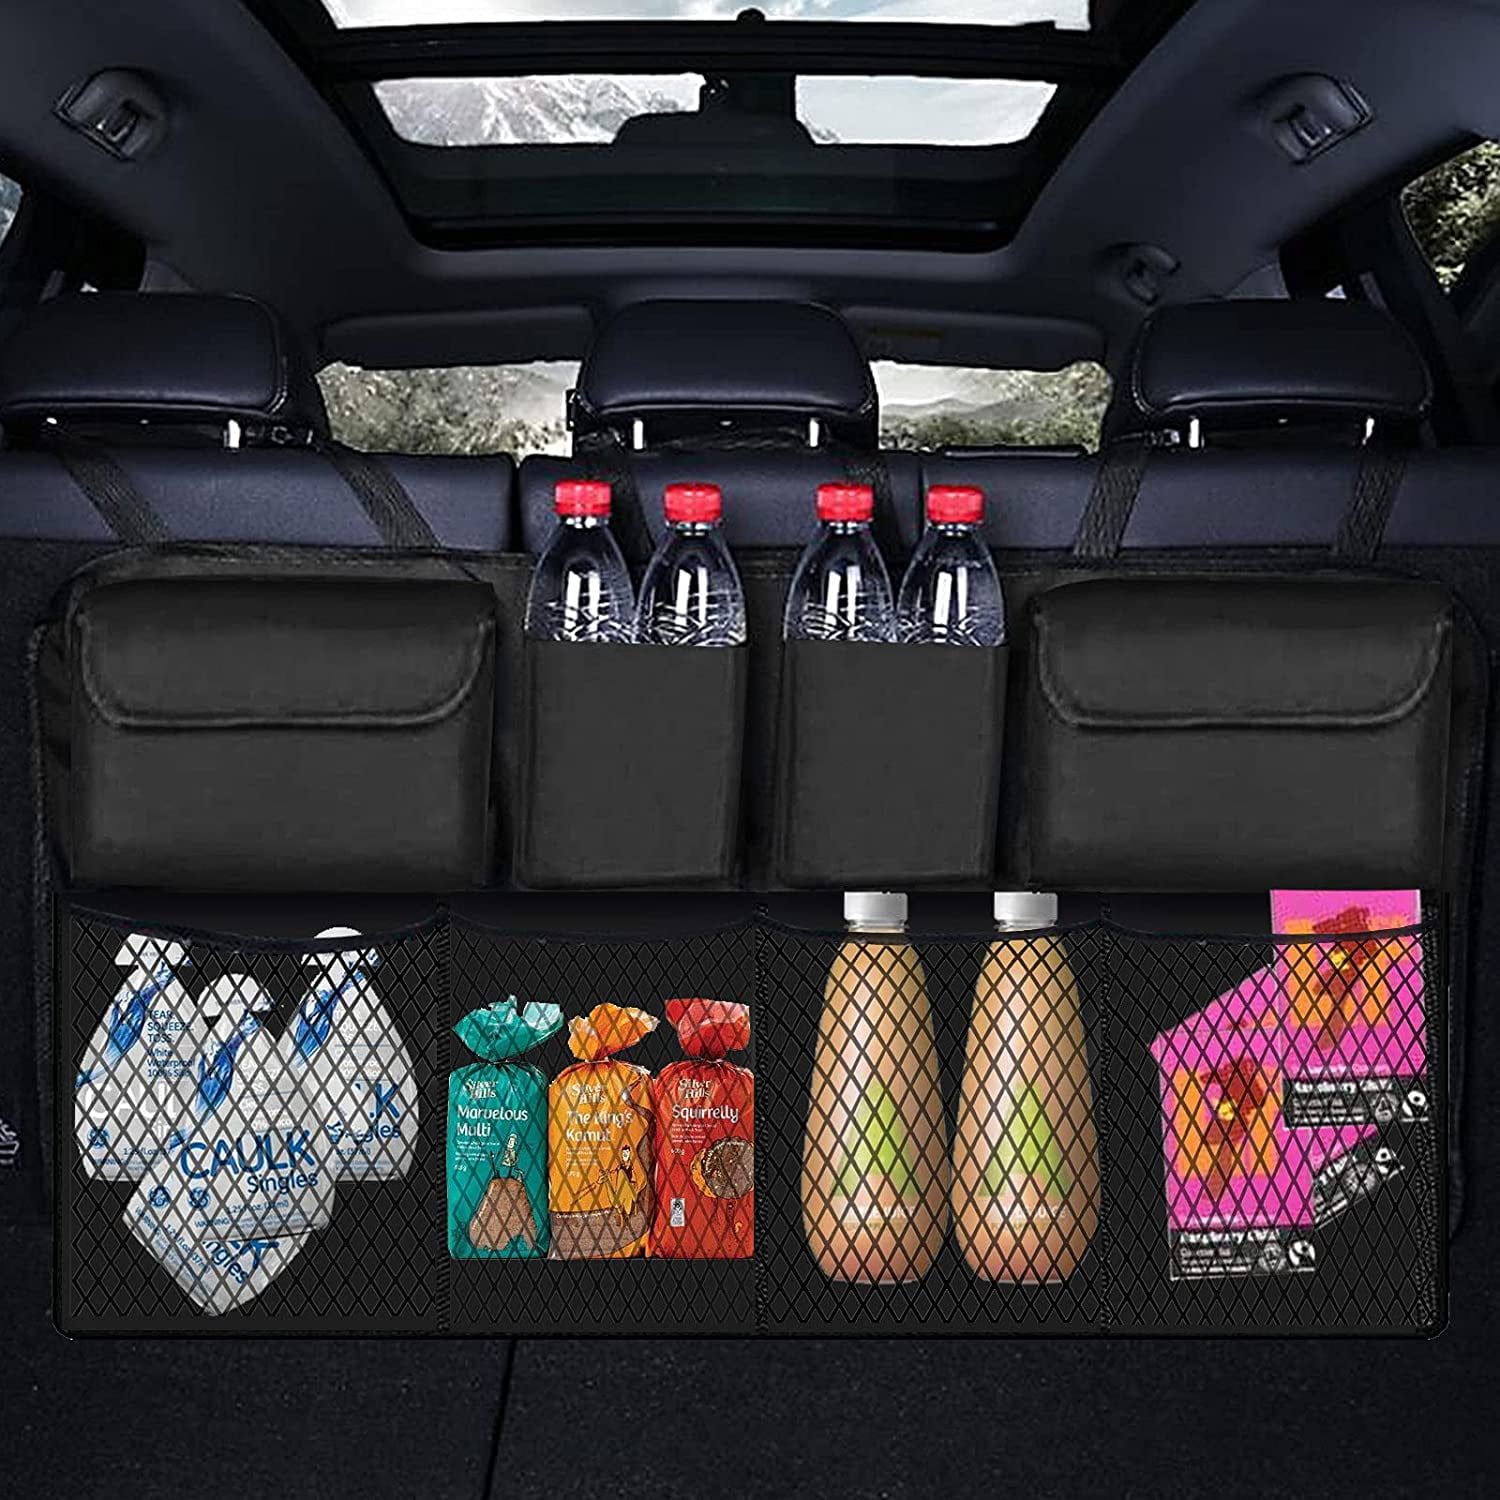 Car Storage Car Back Seat Storage Box Trunk Bag Vehicle Automotive Tool Multi Color Name : Coffe use Tools Organizer Fit for Trunk Carpet Folding Emergency Box Automotive Interior Accessories